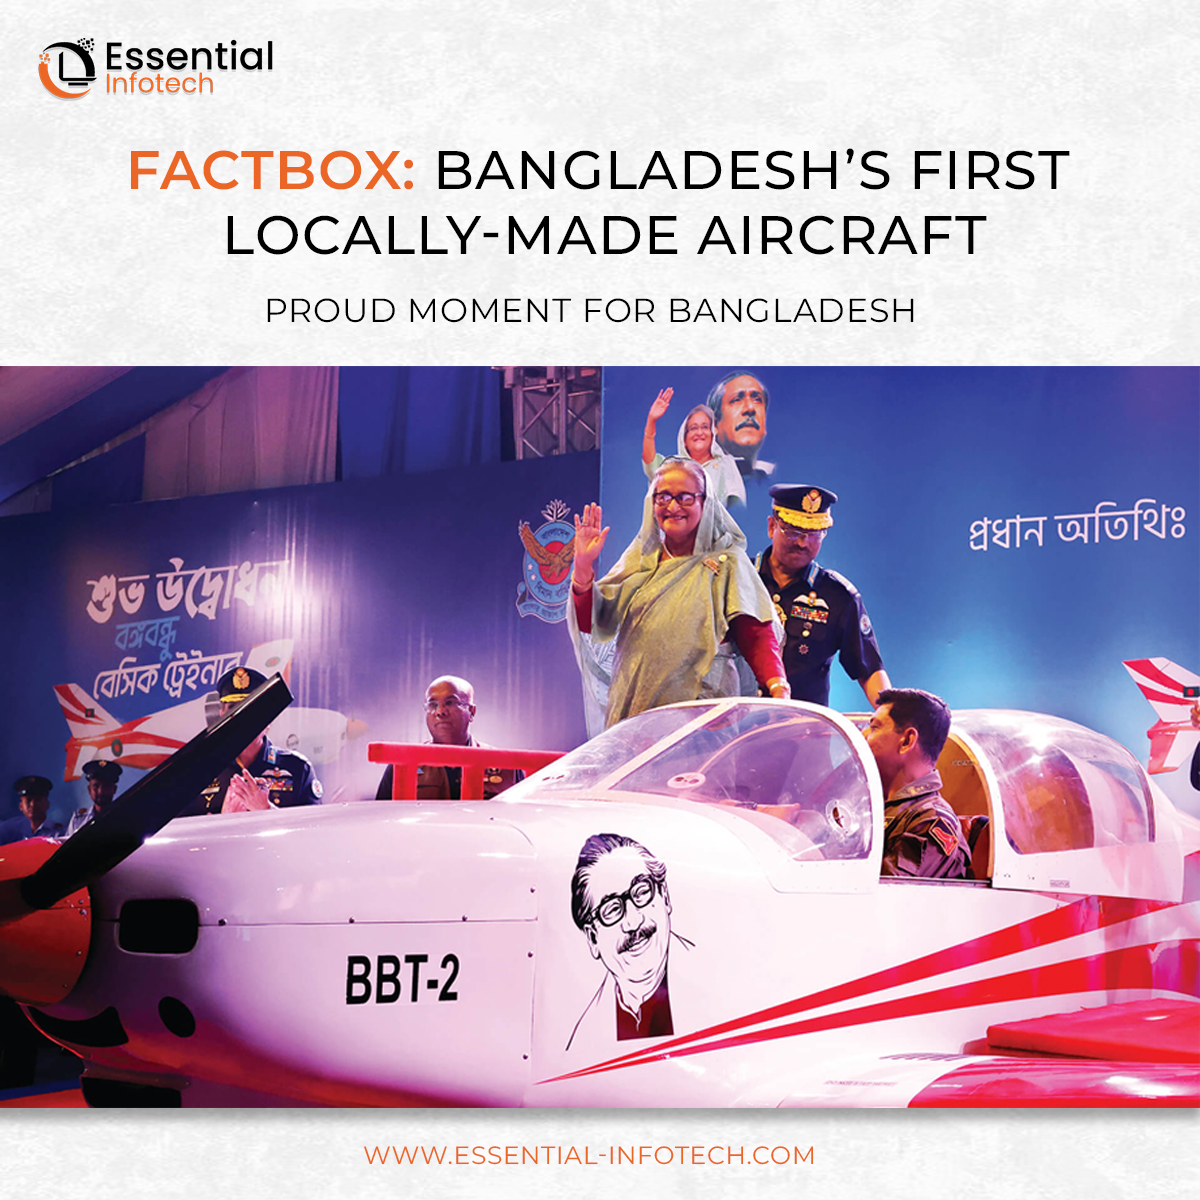 Prime minister Sheikh Hasina inaugurated first basic trainer aircraft manufactured by the Bangladesh Air Force and named after the country’s founding president Sheikh Mujibur Rahman. #EssentialInfotech #ISOCertified #Bacco #Basis #DigitalBangladesh #SmartBangladesh #ICTDivision